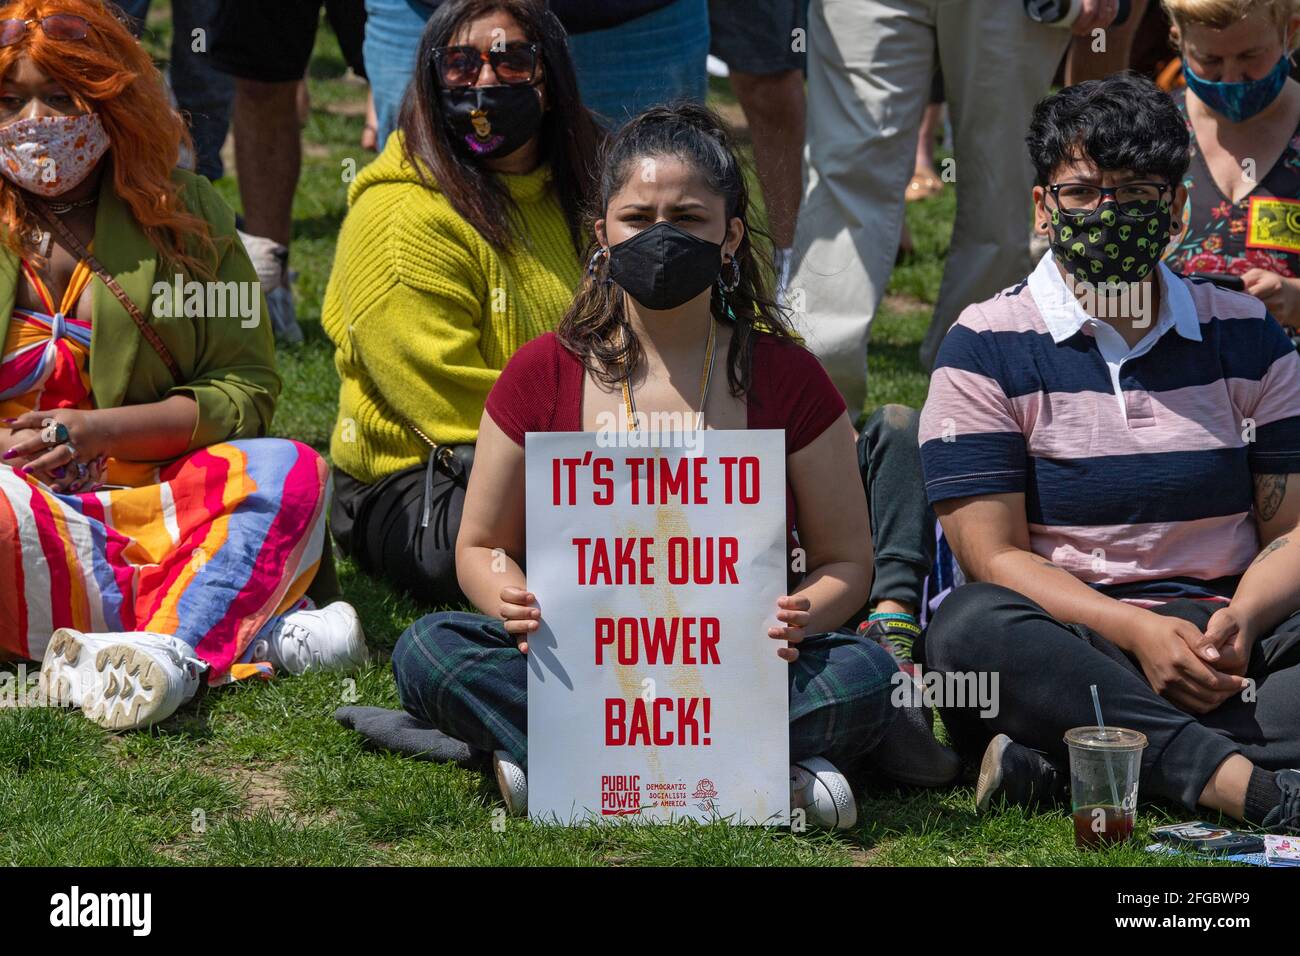 A woman holds a sign that reads 'it's time to take our power back!' during Earth Day Celebration in Astoria Park of the Queens borough of New York City.Congresswoman Ocasio-Cortez joined by New York State Senator Jessica Ramos and New York Assembly Member Zohran Mamdani for remarks about the NRG Energy, Inc proposal for the Astoria power plant. The Congresswoman opposes NRG's effort to replace their 50-year old turbine at the Astoria 'peaker' plant with a generator that burns fossil fuels extracted by fracking. Stock Photo